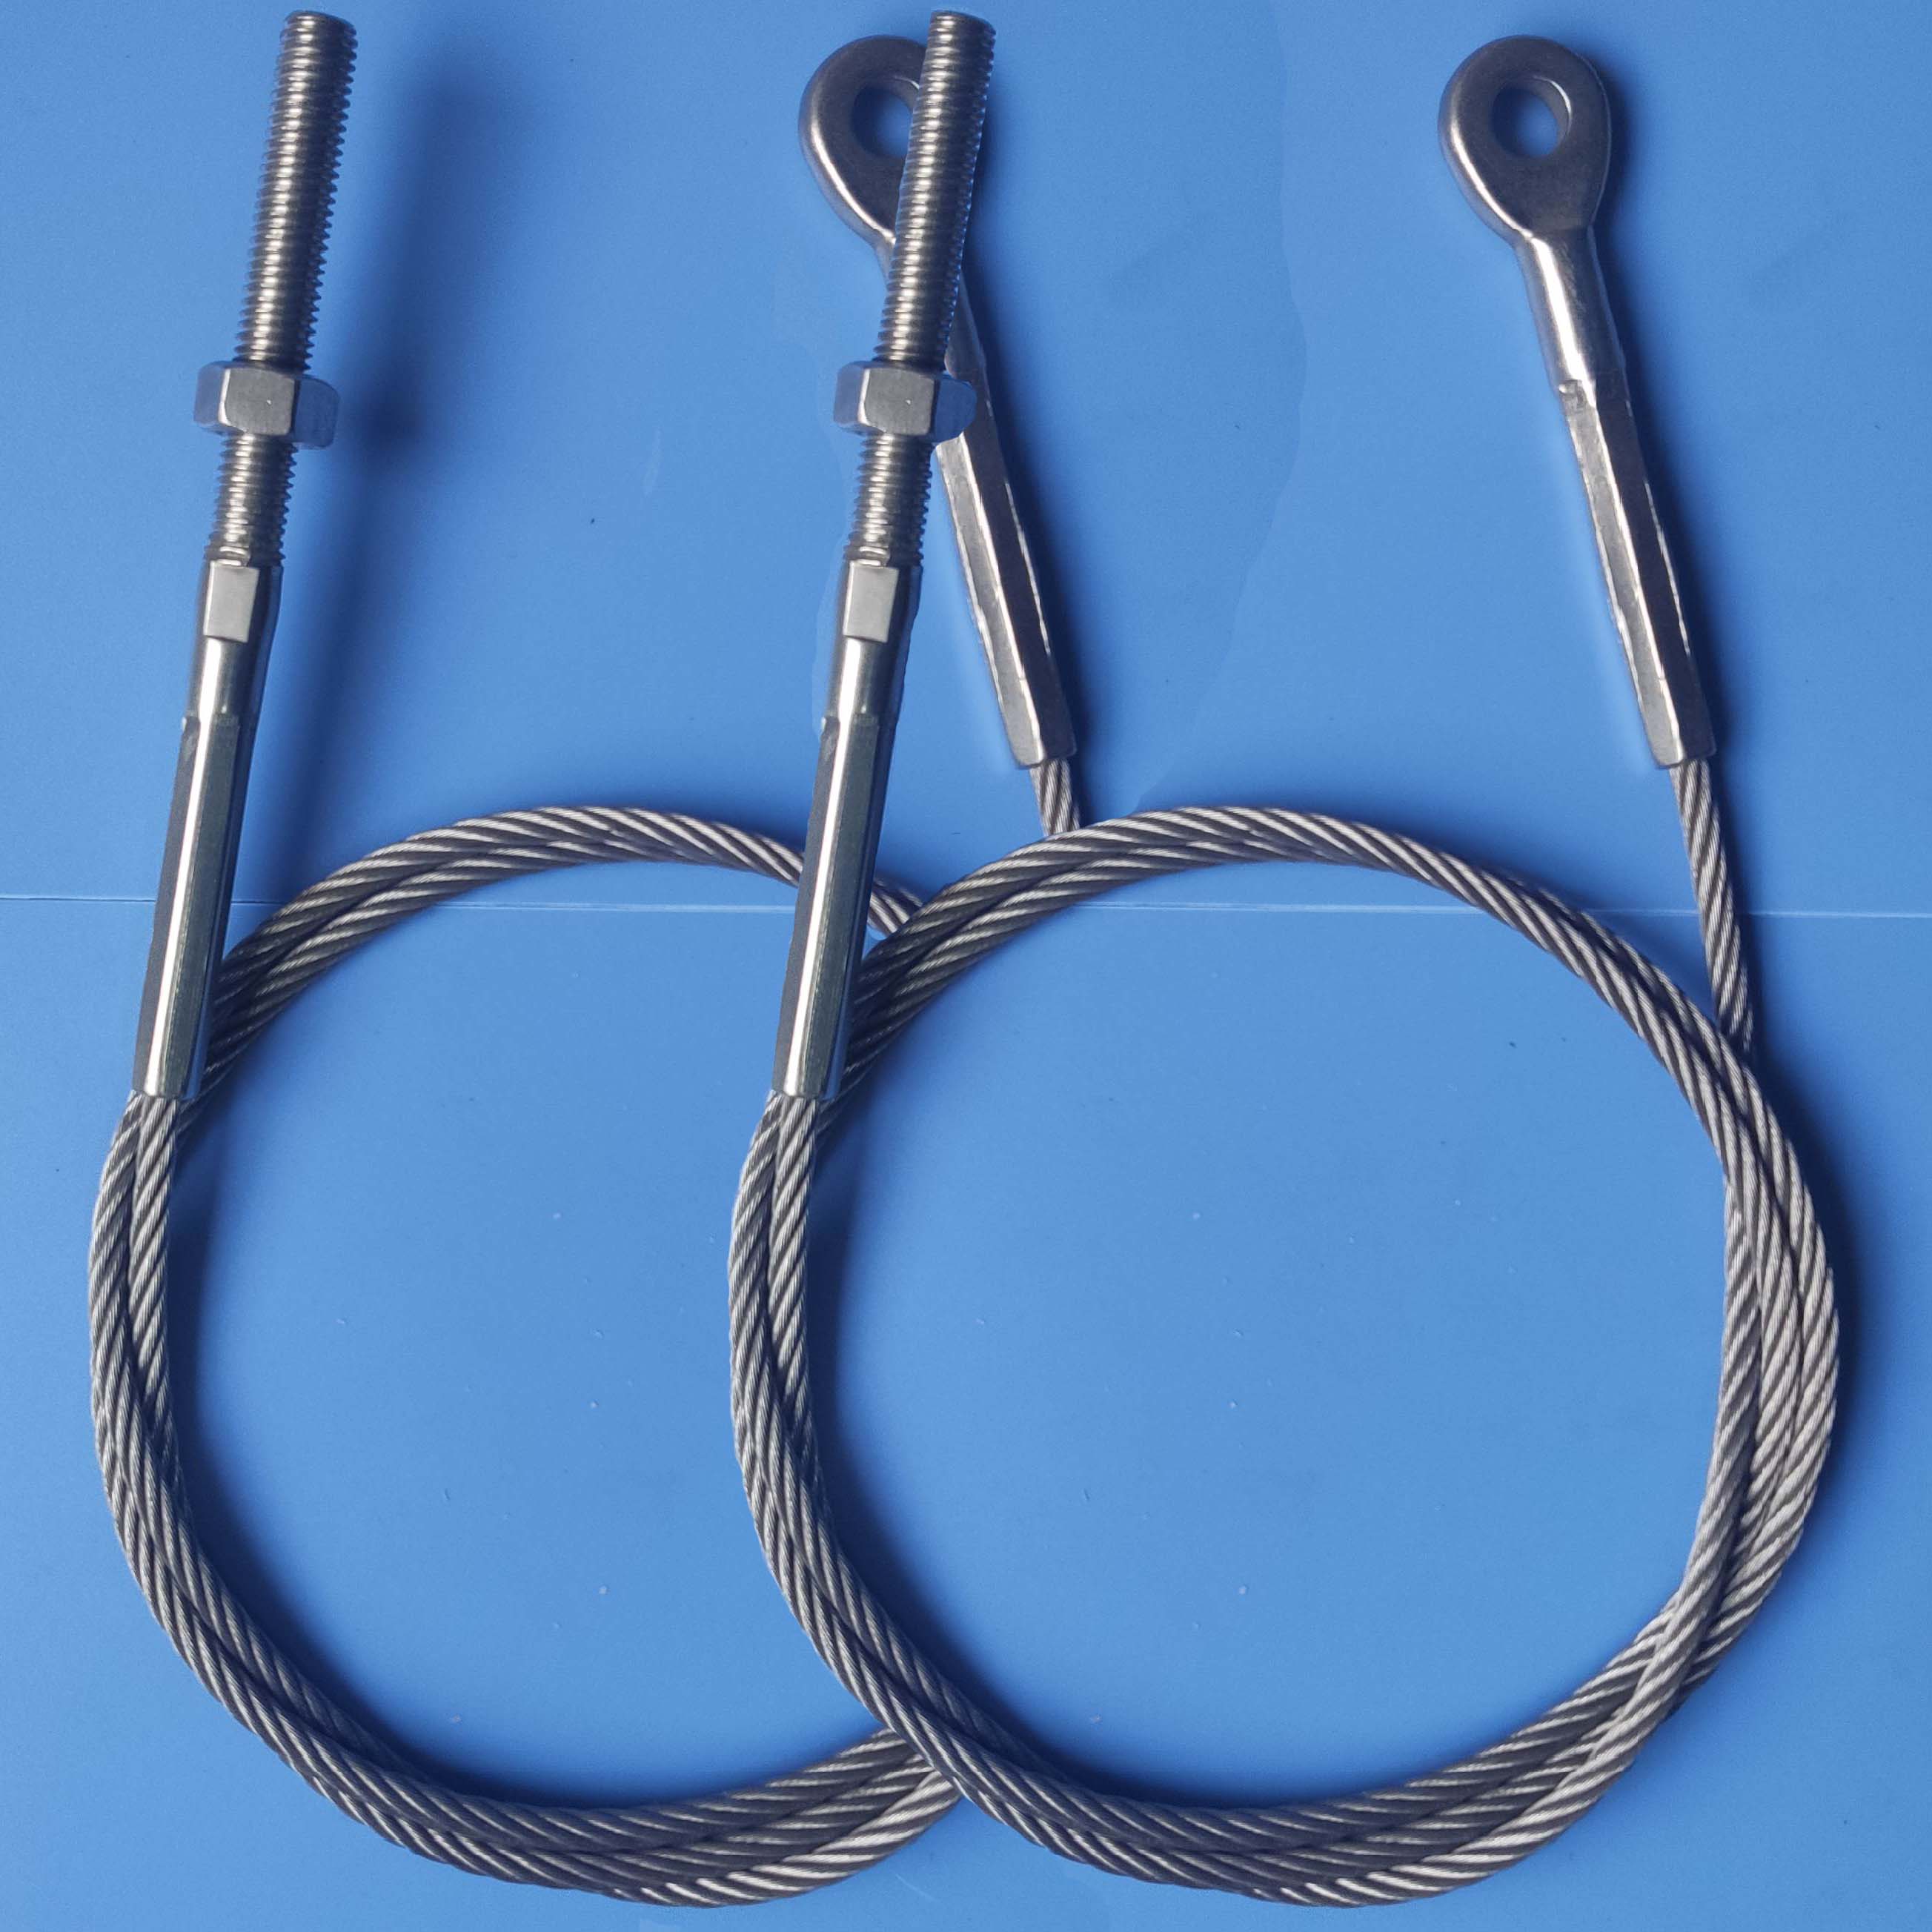 wire rope with terminal